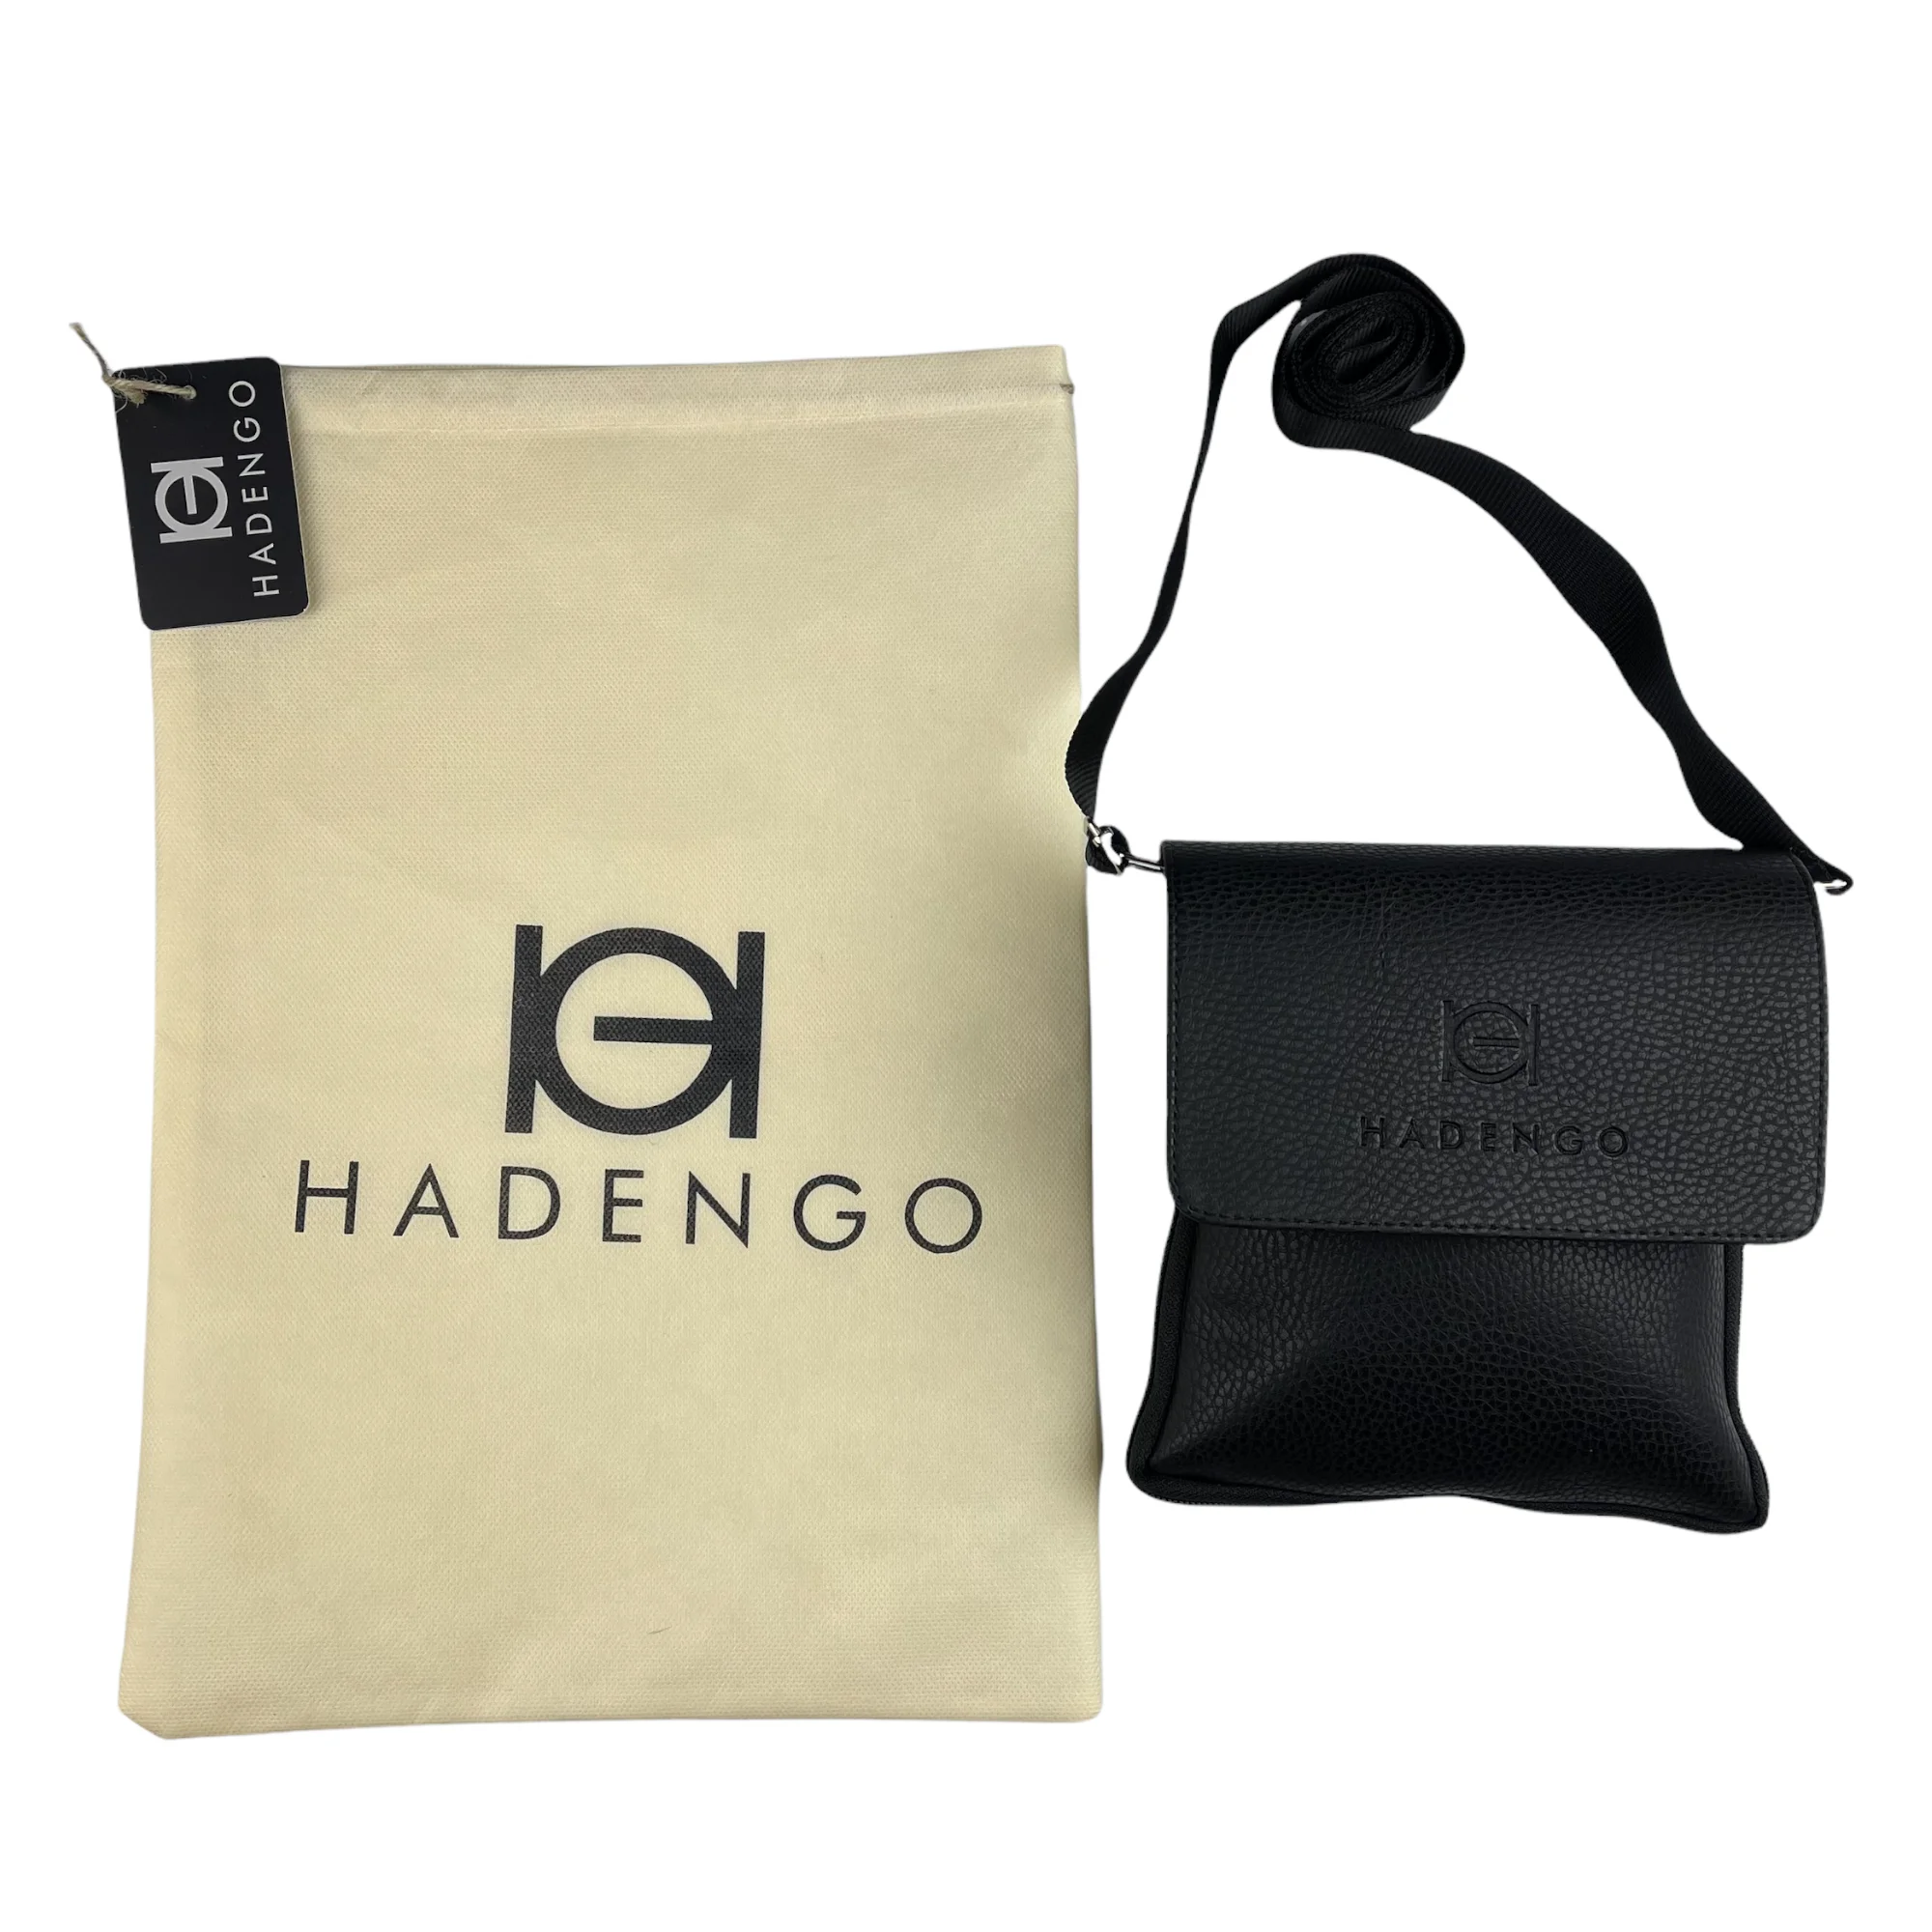 Mens And Womens For Crossbody Bags Hadengo Messenger Tote Sweet Shoulder Chest Fashion Designer Organizer Gifts Unisex Handmade